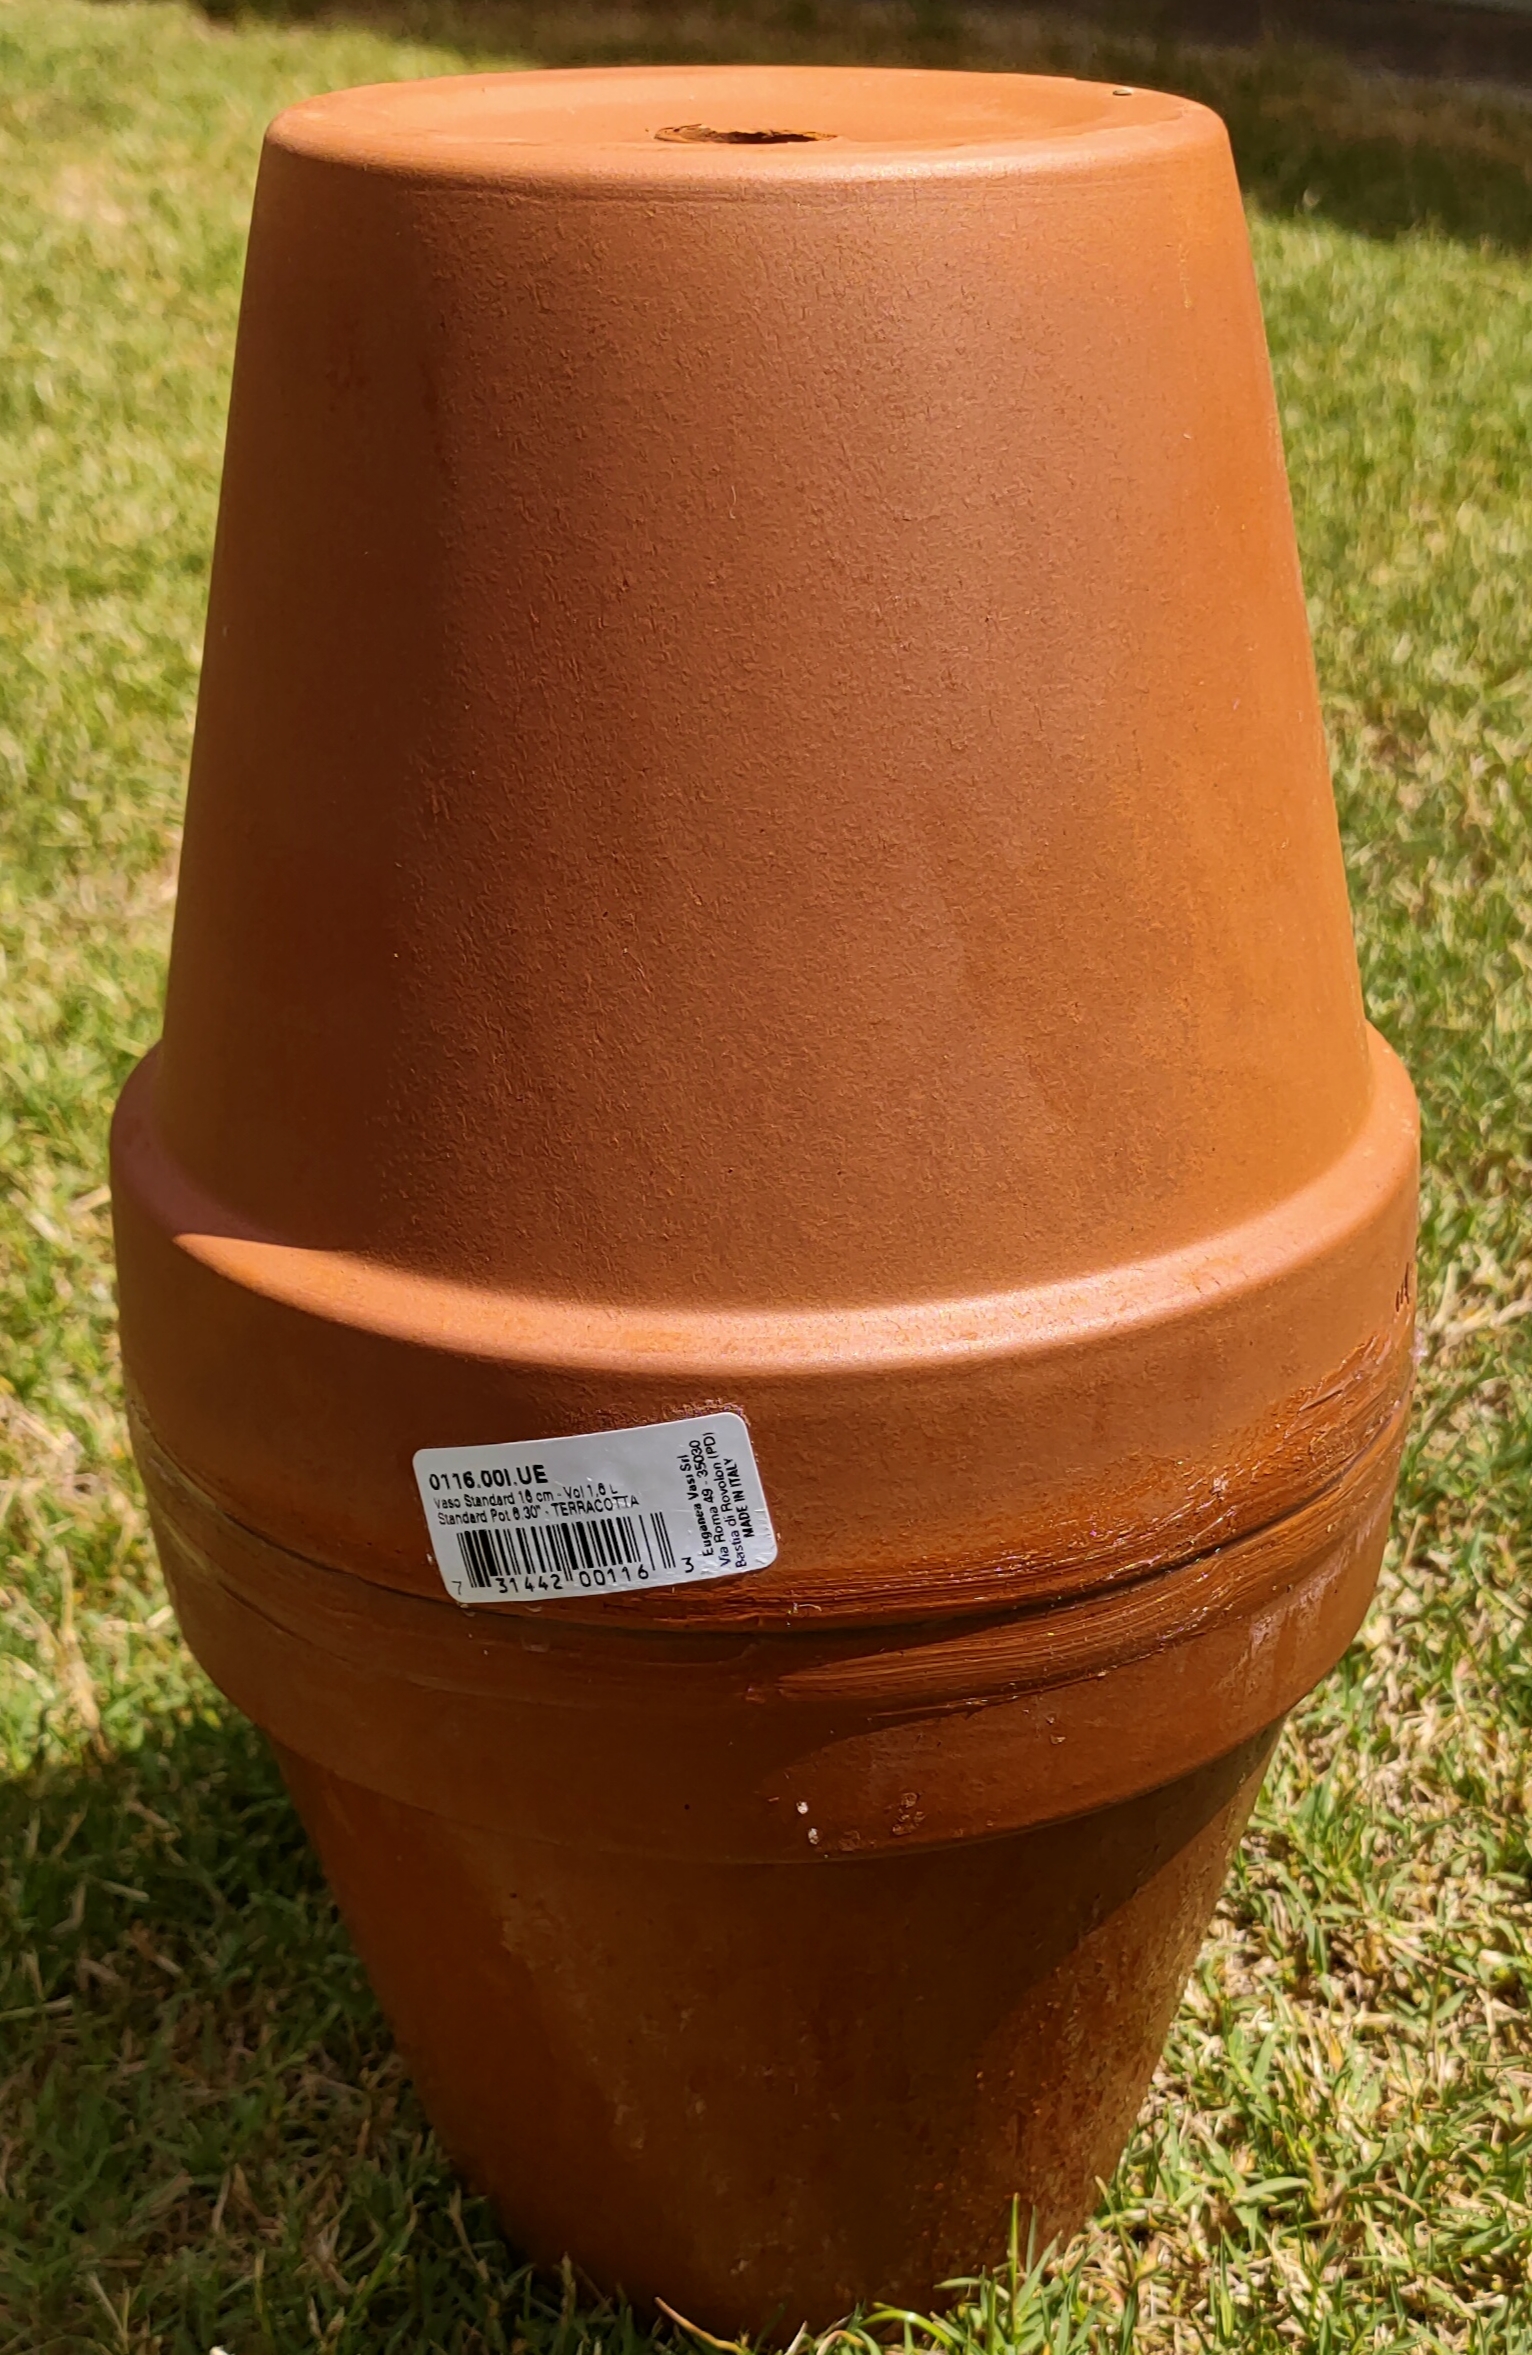 Picture of a DIY olla